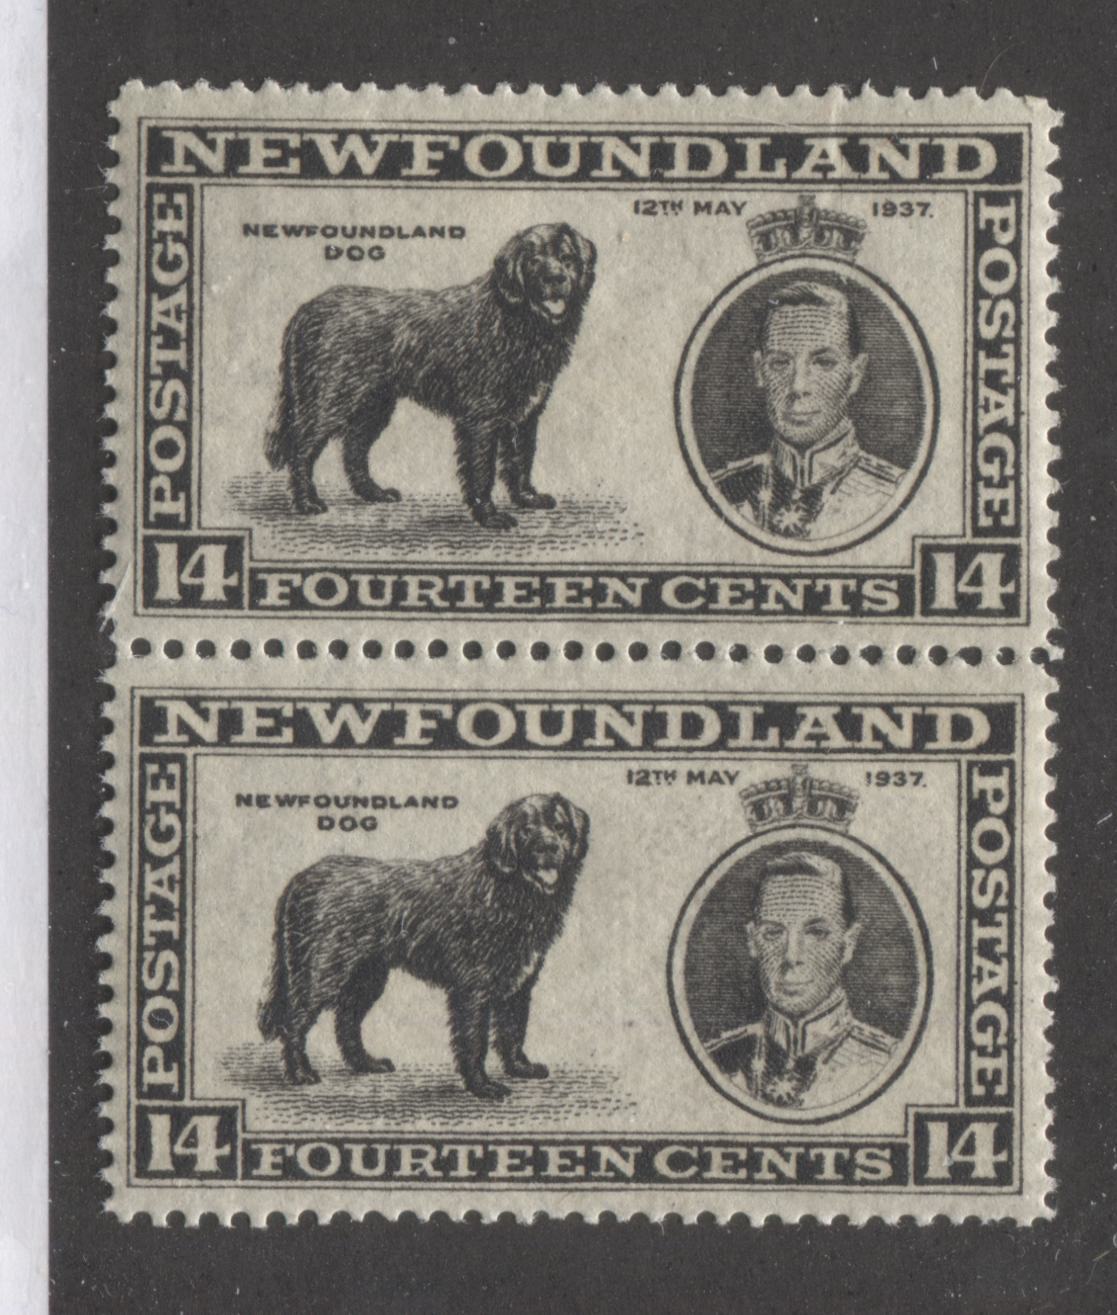 Newfoundand #238 14c Black 1937 Long Coronation Issue Pair With Guideline Through Crown of Top Stamps, VFNH, Perf. 14.25 Line Brixton Chrome 